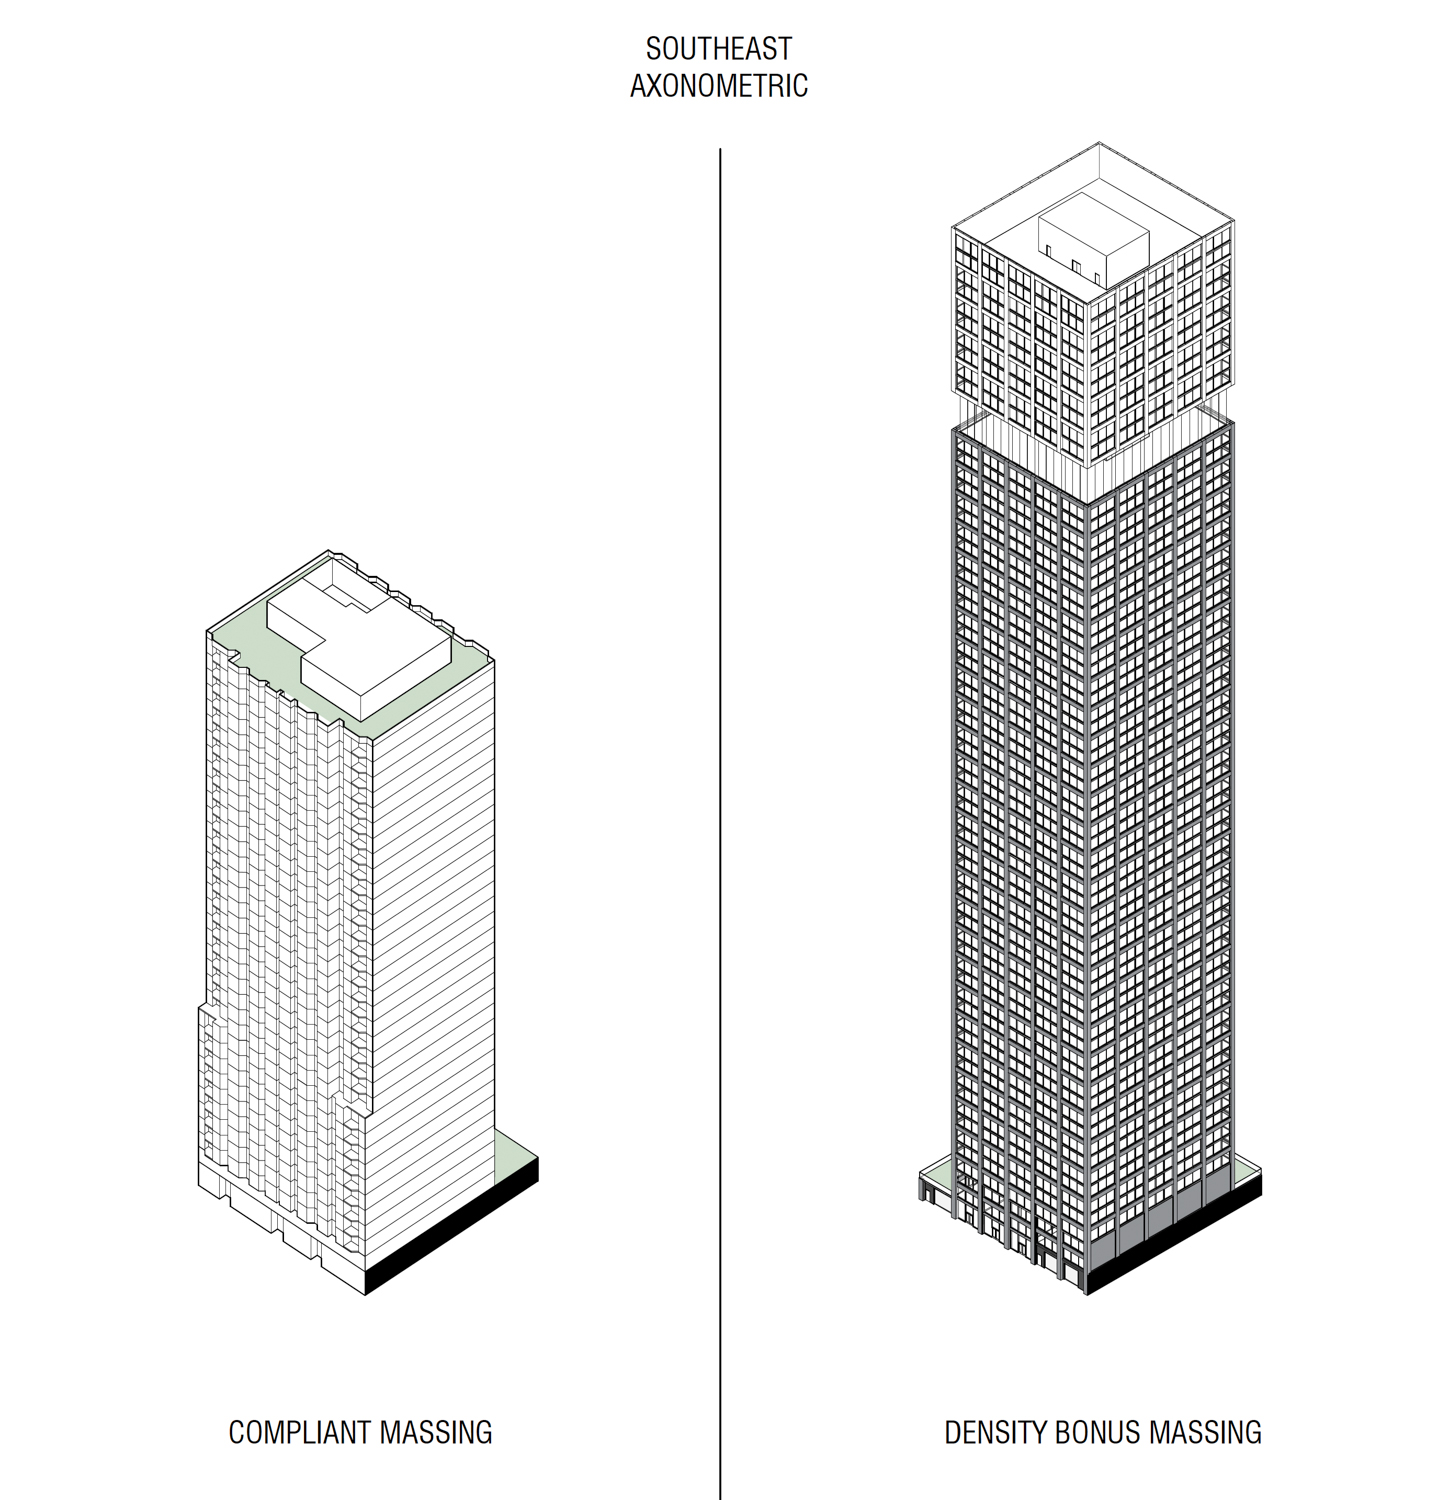 620 Folsom Street base massing compared with the Density Bonus proposal, rendering by Arquitectonica